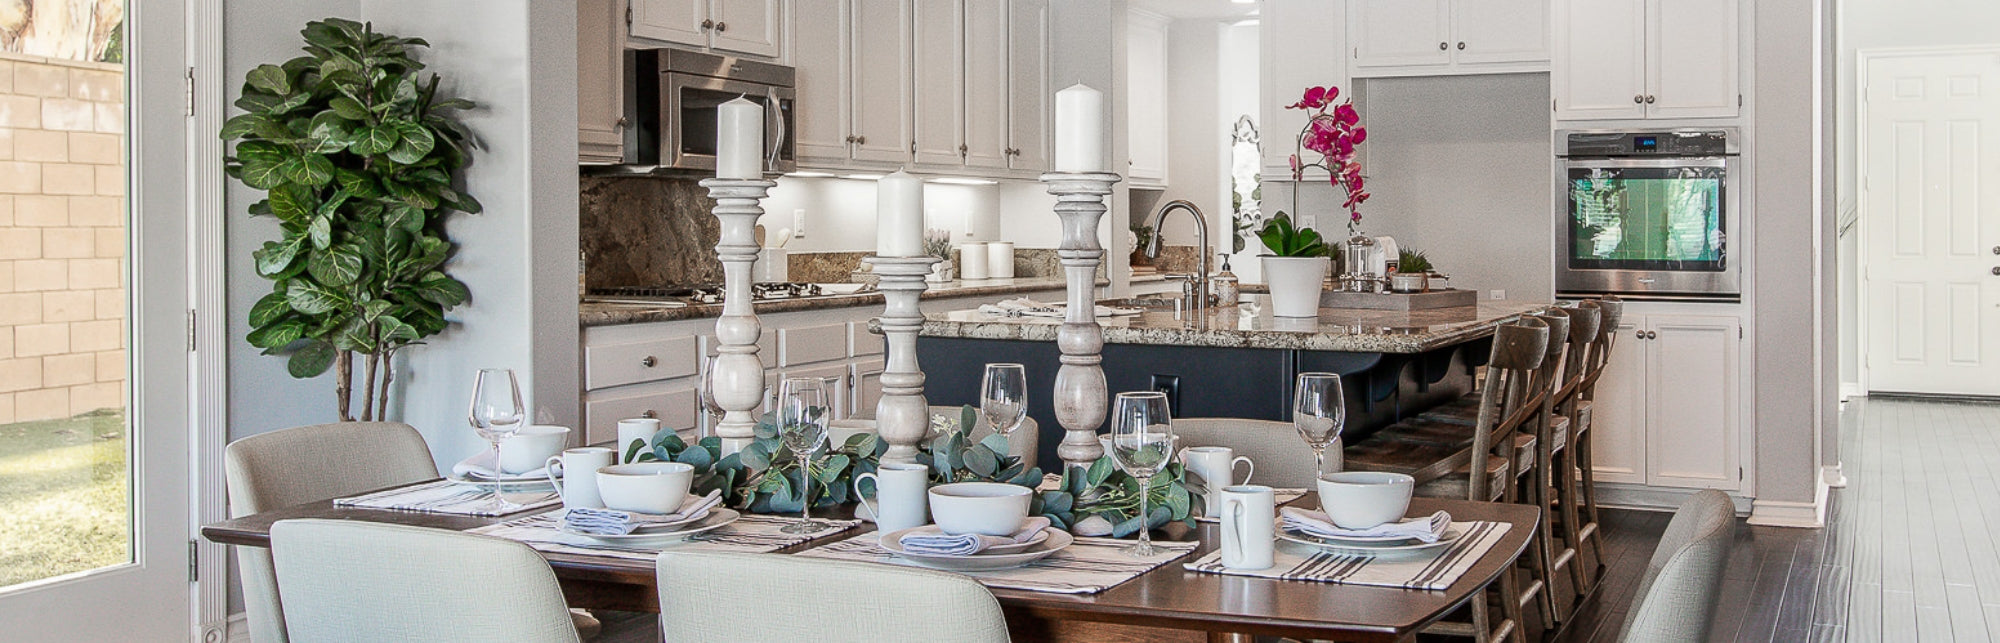 Why stage - top reasons to stage your home -  image of staged dining table and kitchen